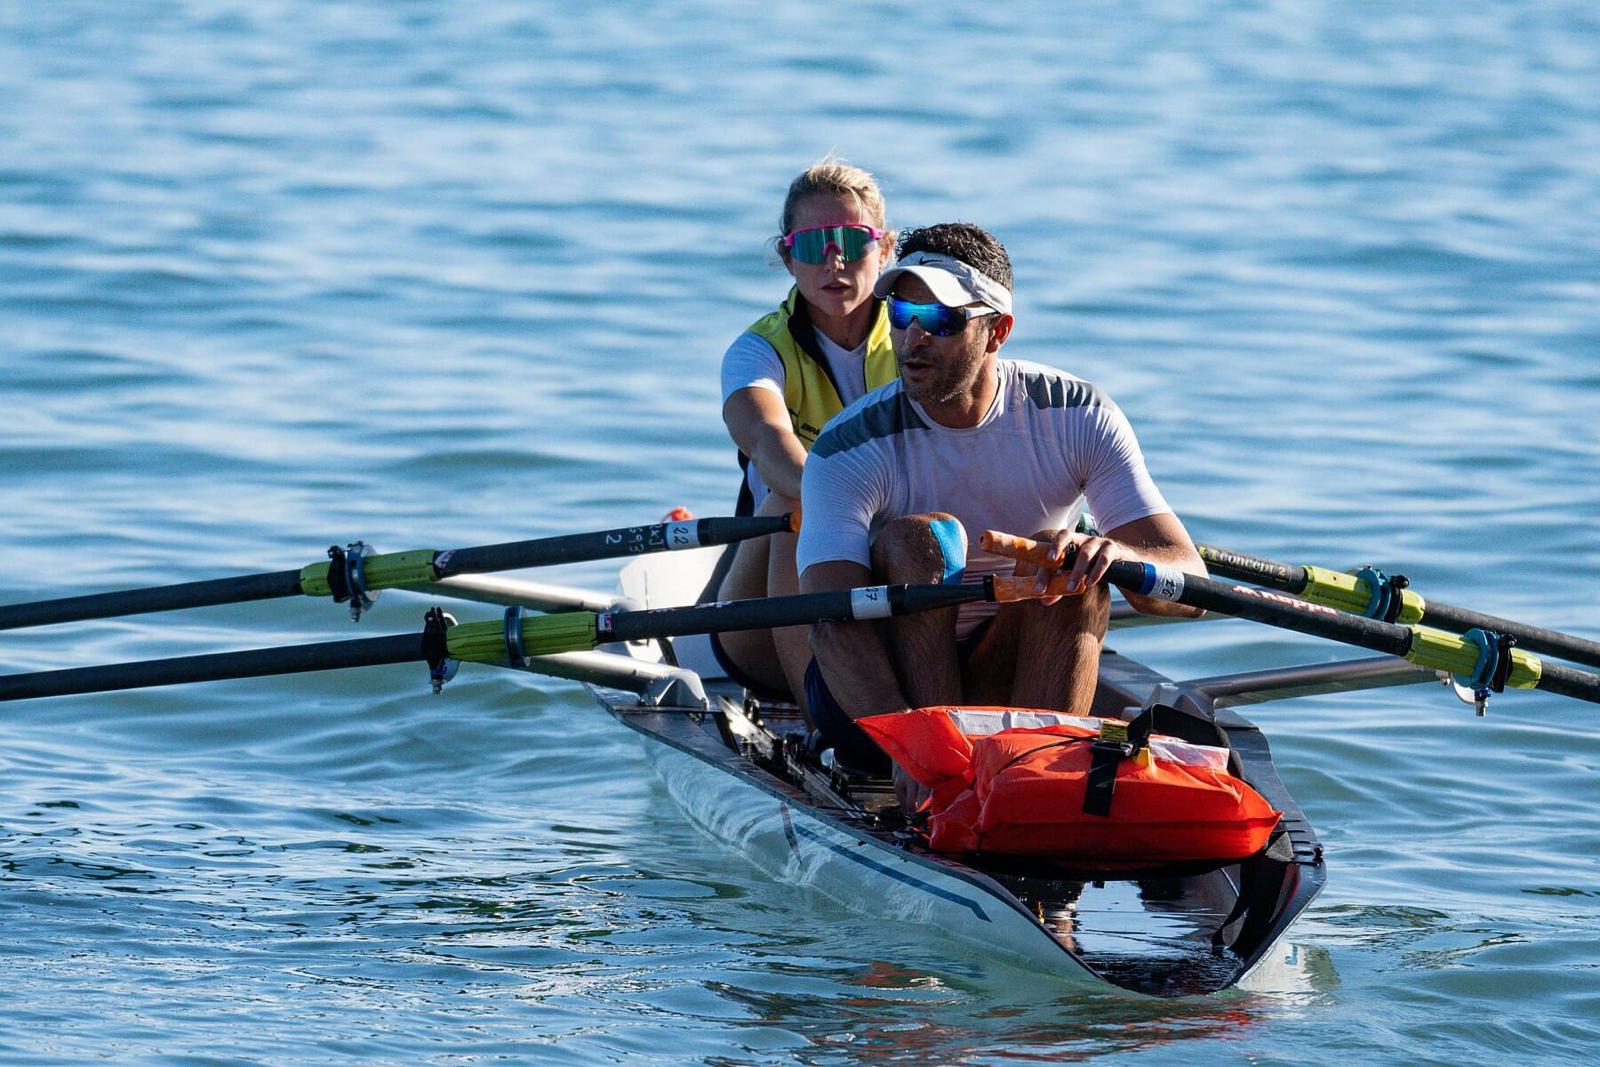 Mitochondria and Long Covid: the SoLongevity Study Featuring Two Rowing Champions